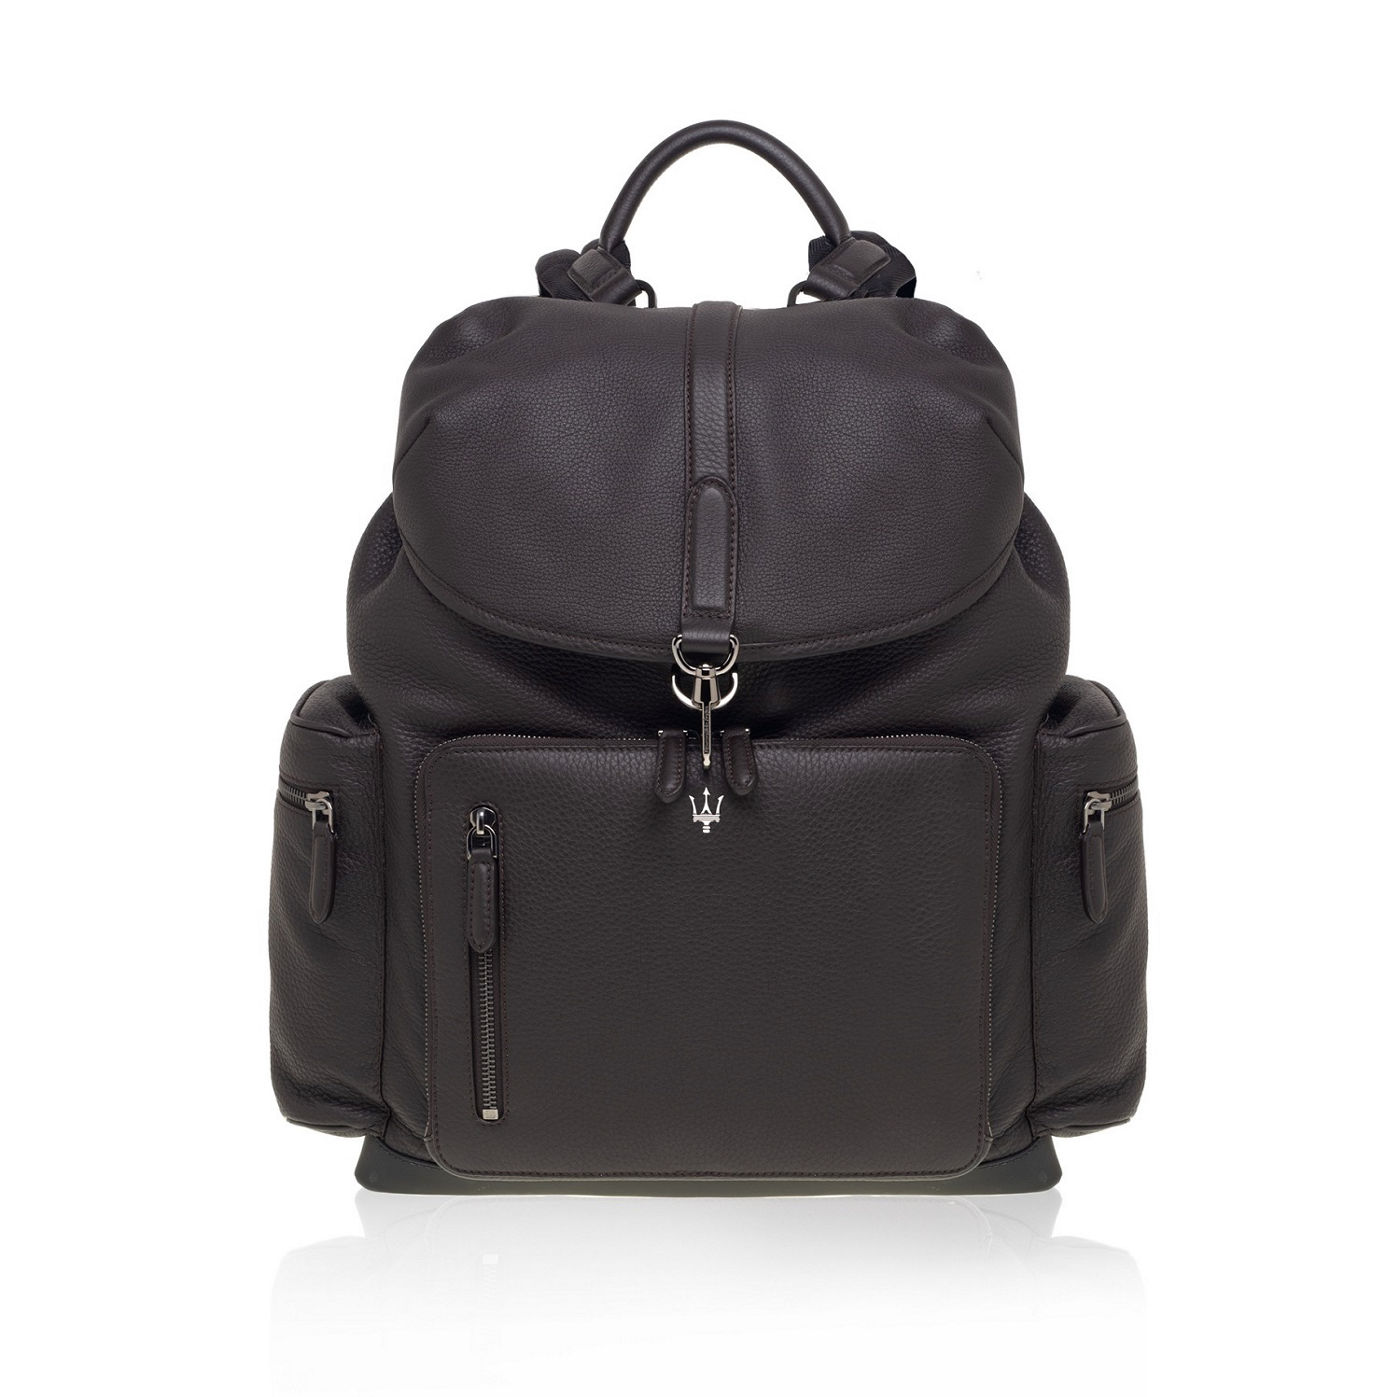 Backpack by Zegna 